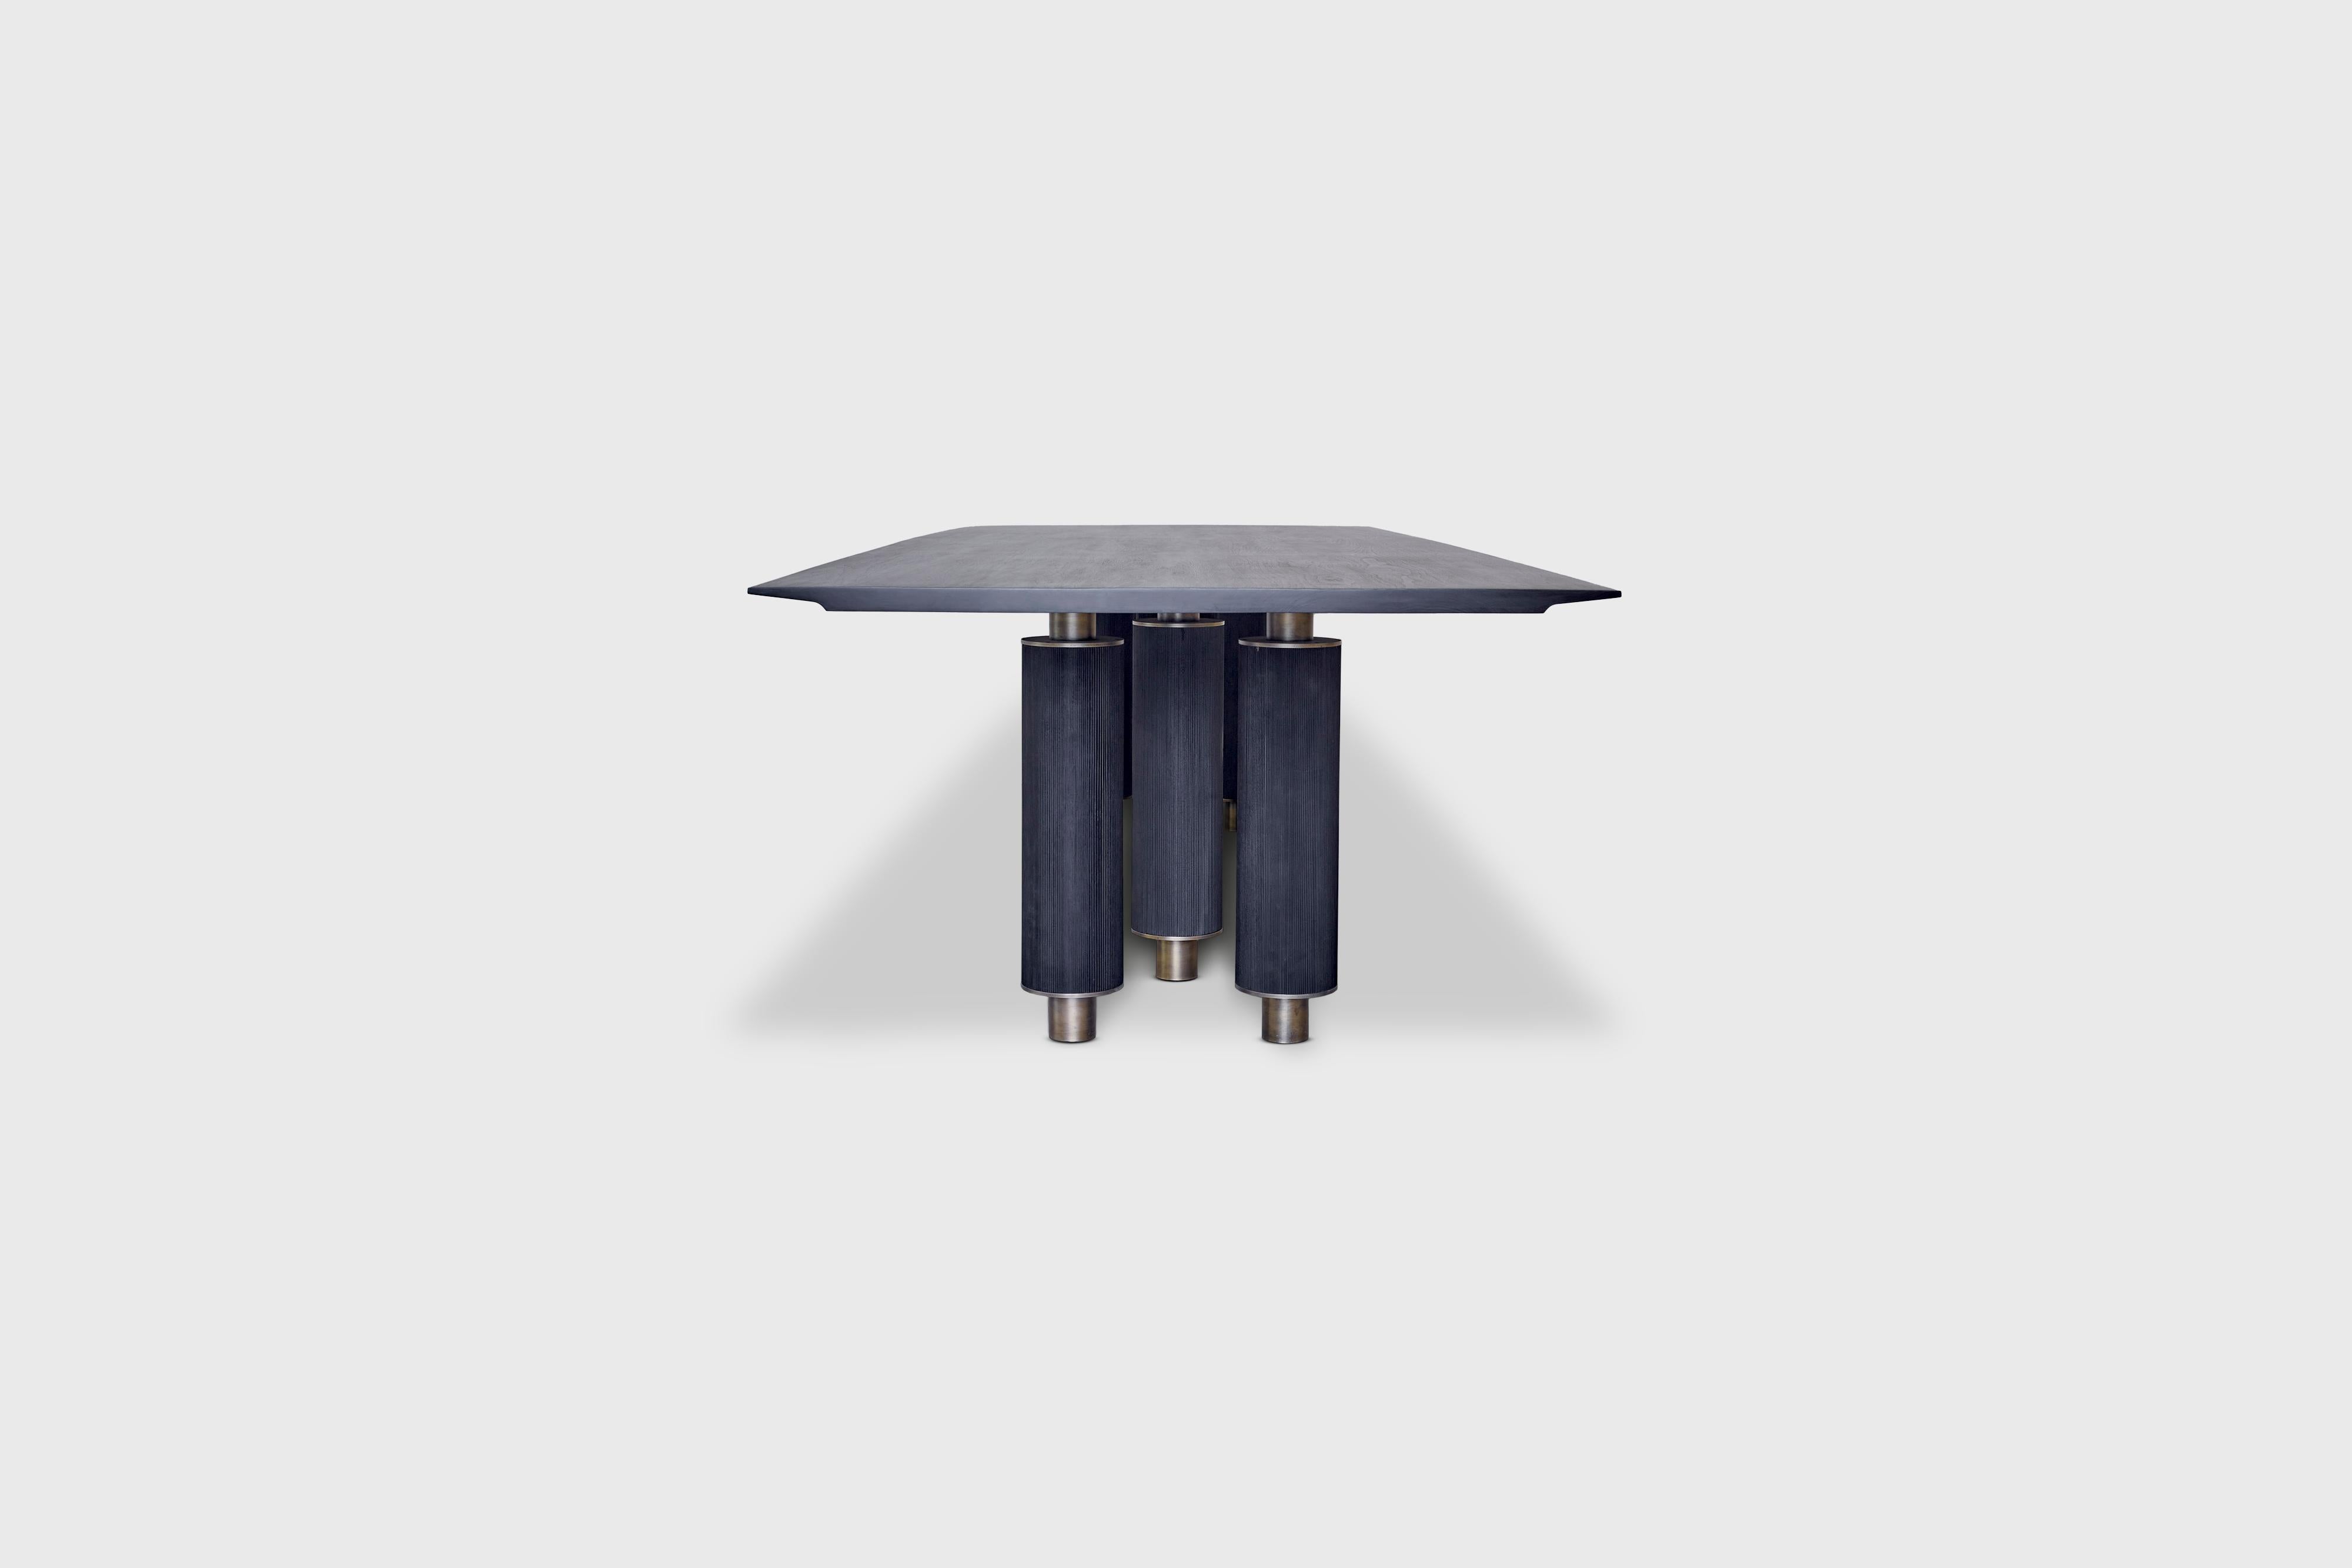 Mexican Atlas Dining Table by Atra Design